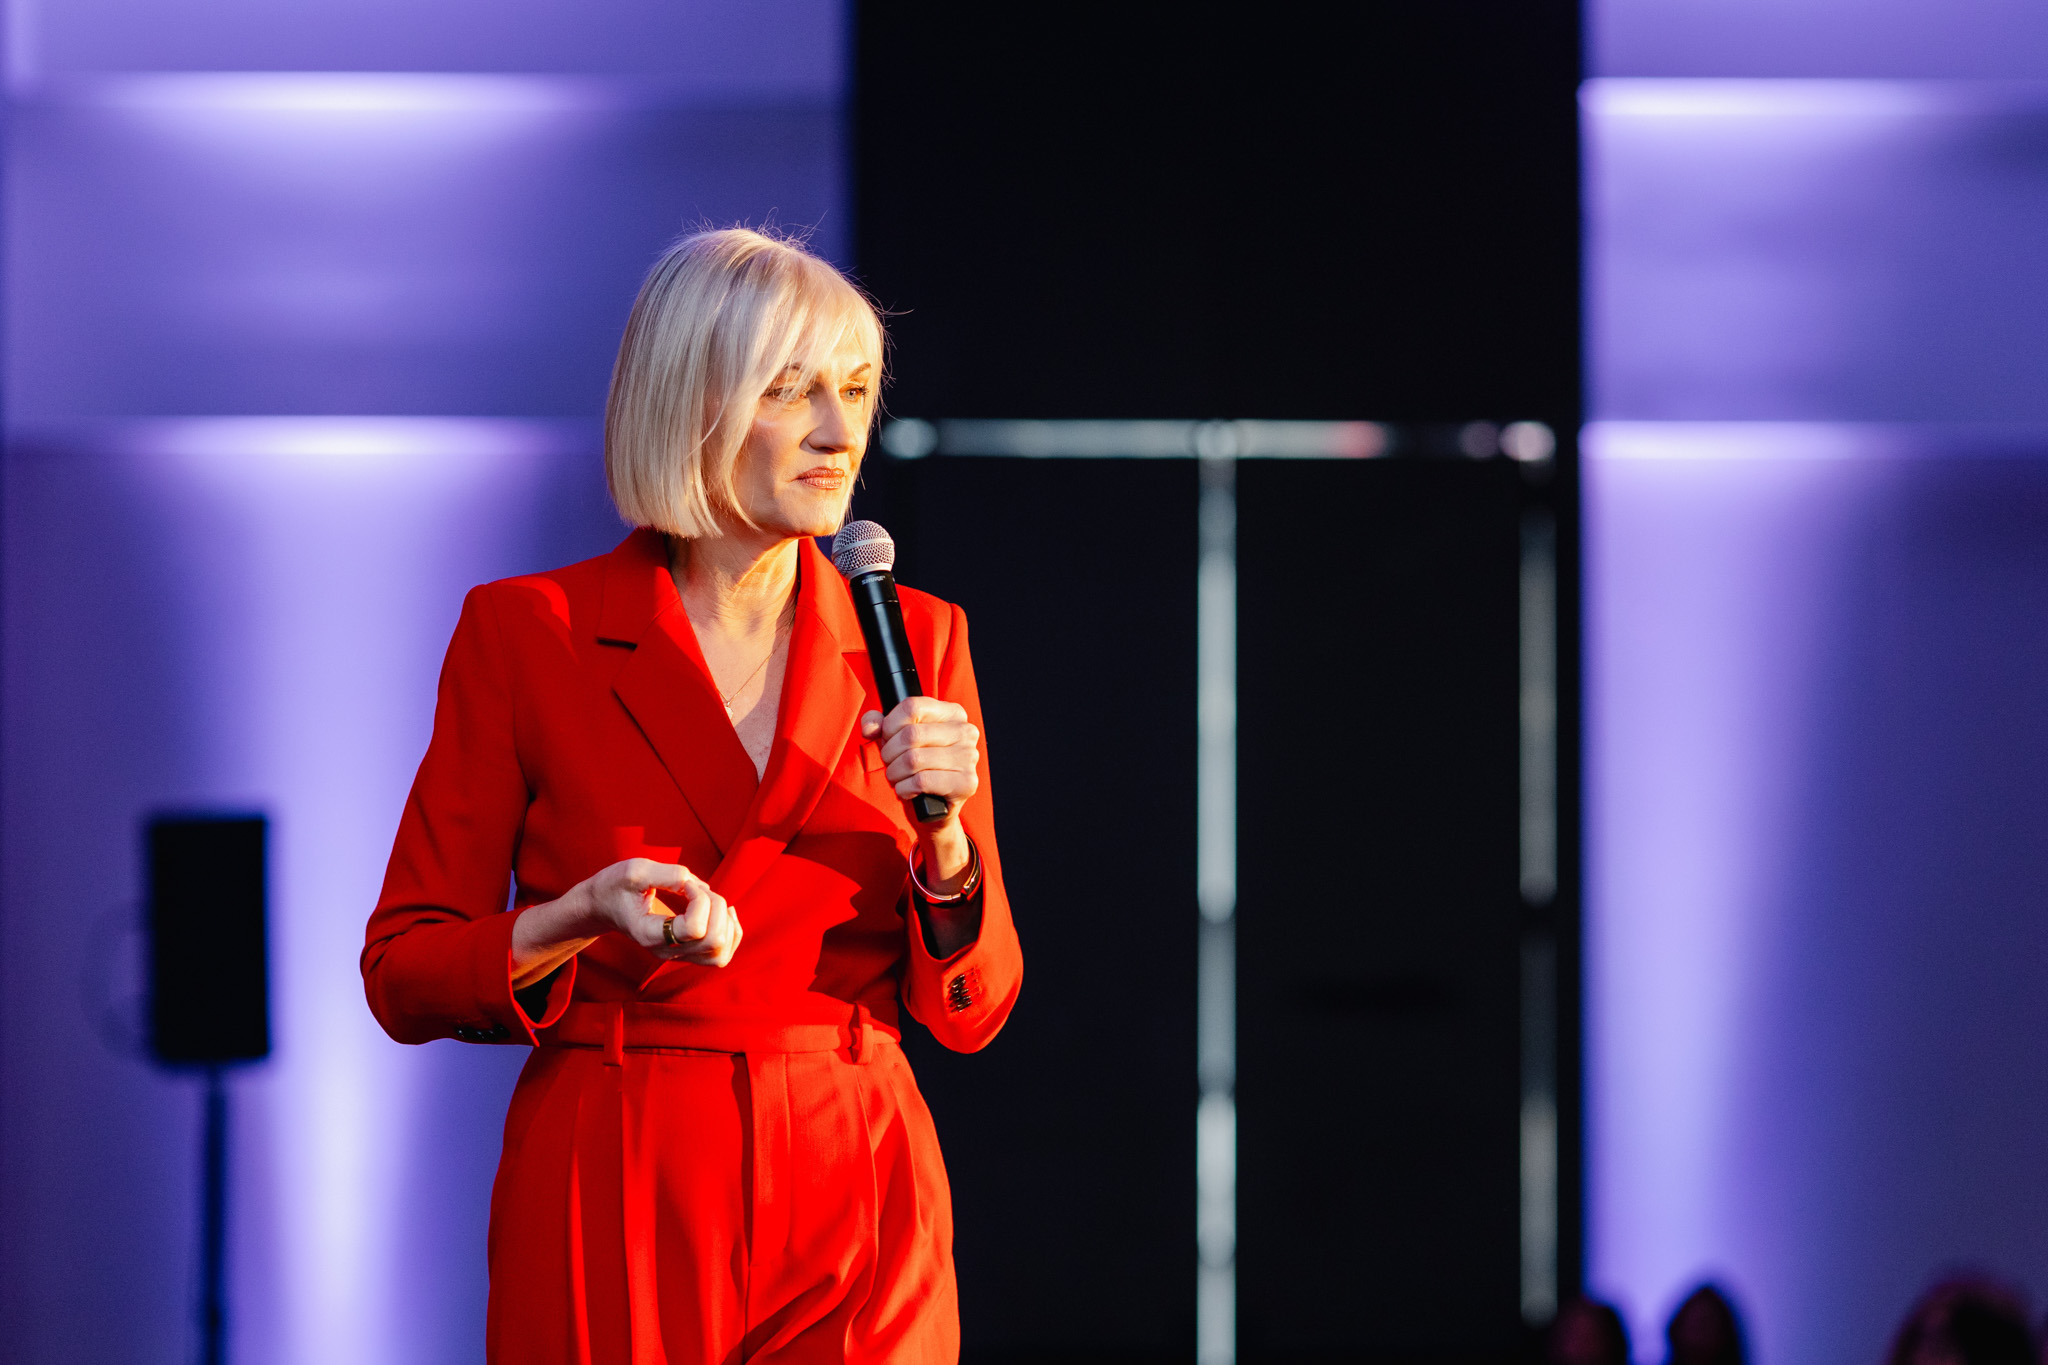 A person with short blonde hair, wearing a red suit, holds a microphone and speaks on stage with purple lighting in the background, capturing the essence of corporate photography.